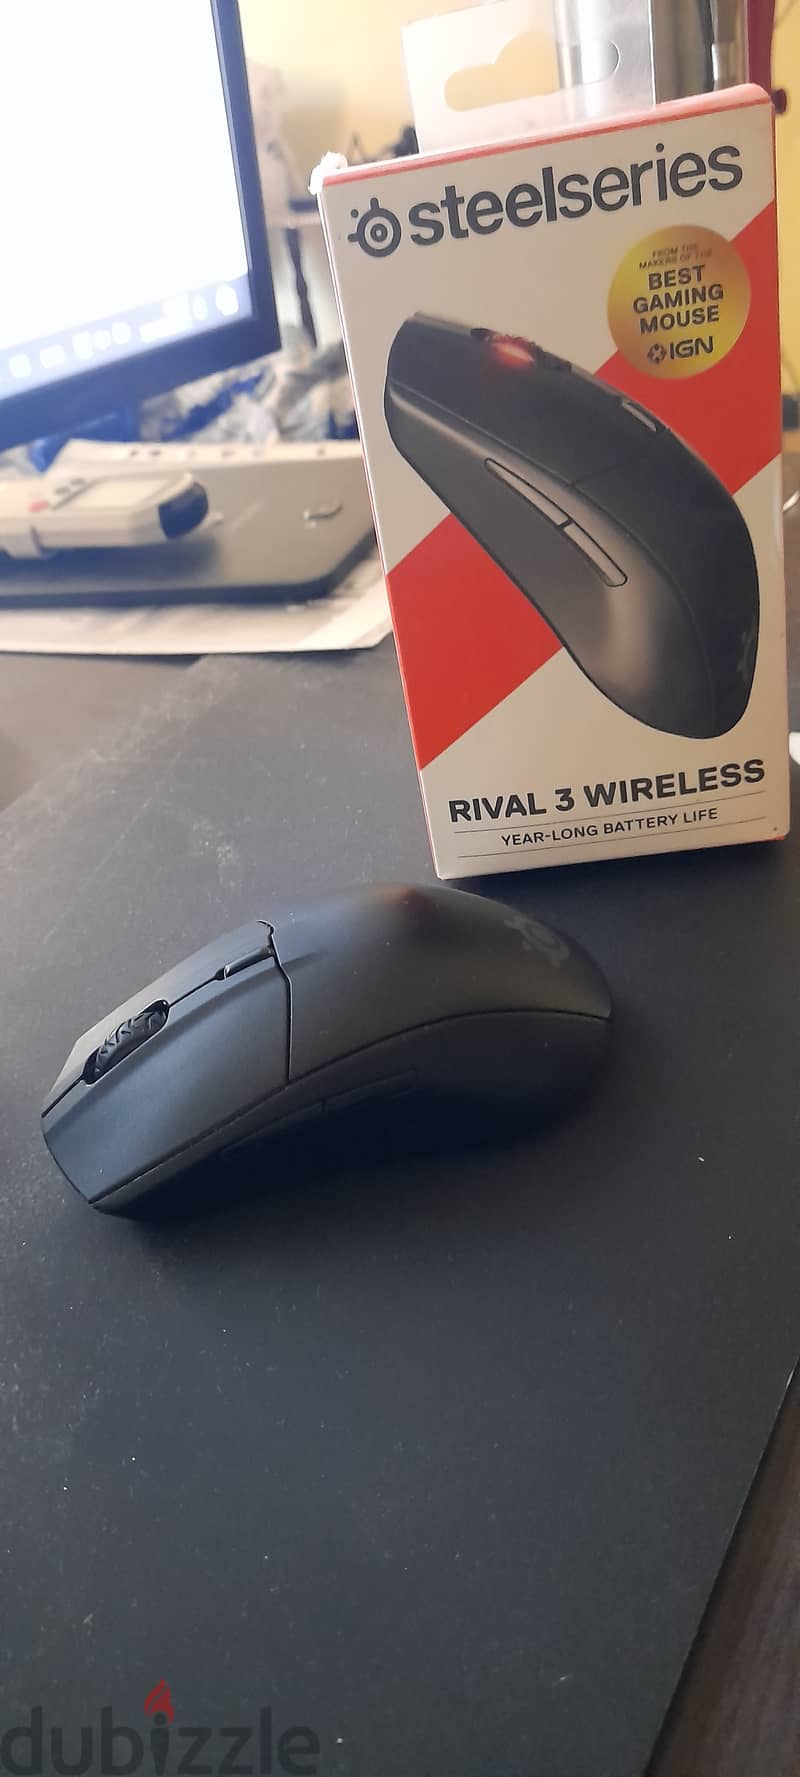 steelseries rival 3 wireless mouse 0